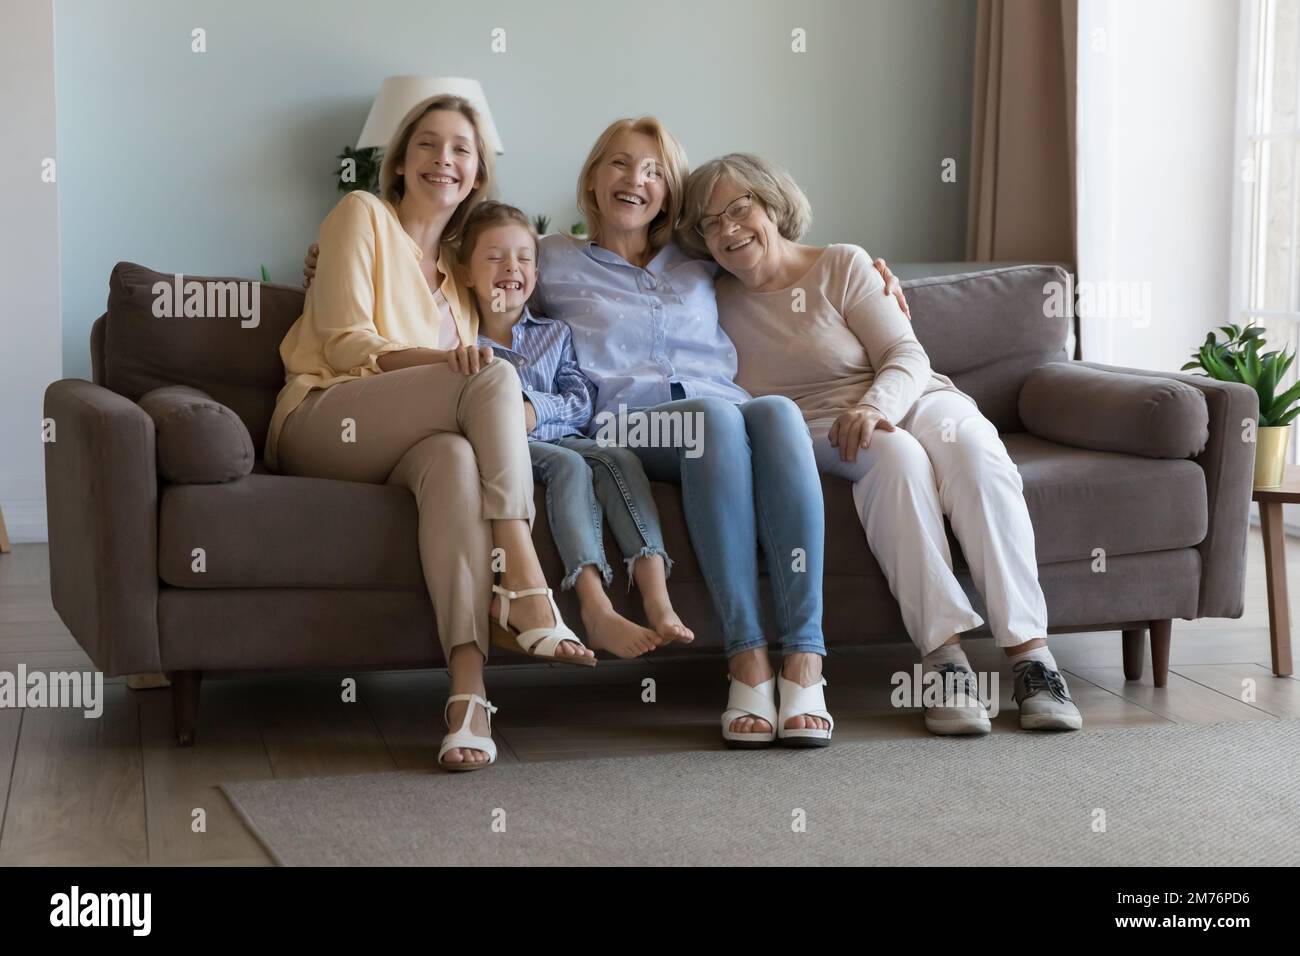 Cheerful cute girls and women of four family generations Stock Photo